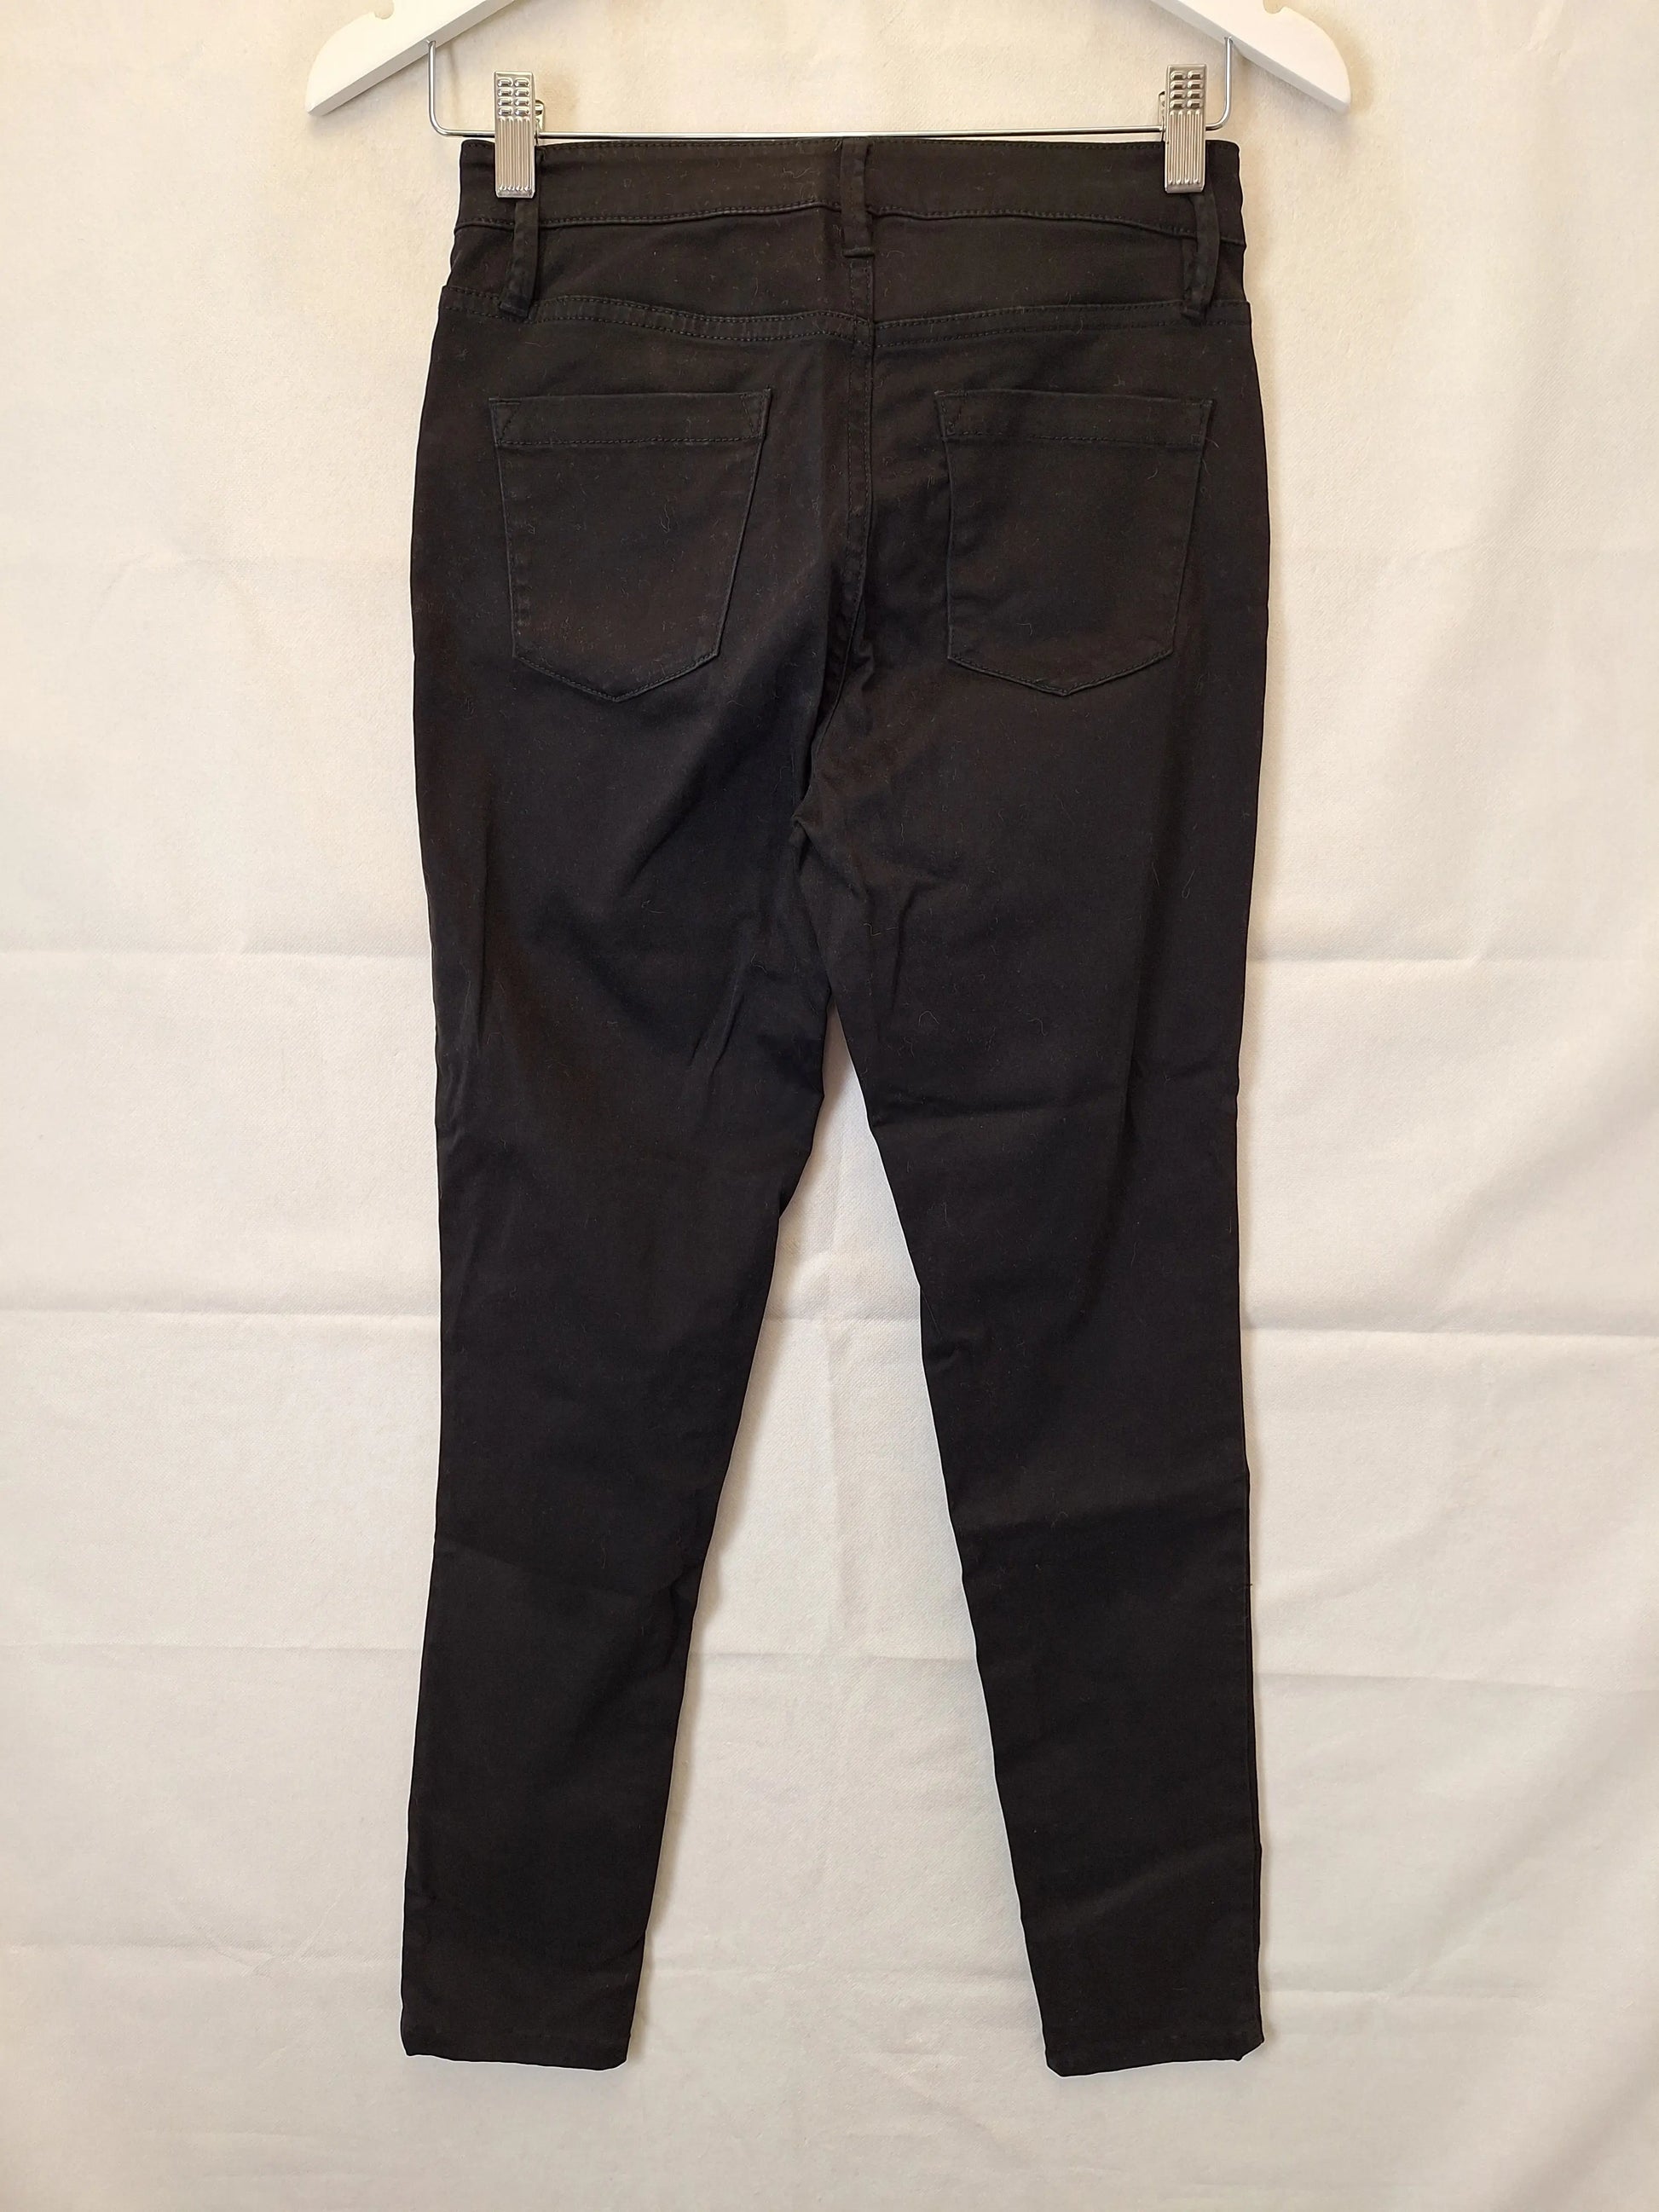 Country Road Light Denim Slim Fit Pants Size 6 by SwapUp-Online Second Hand Store-Online Thrift Store